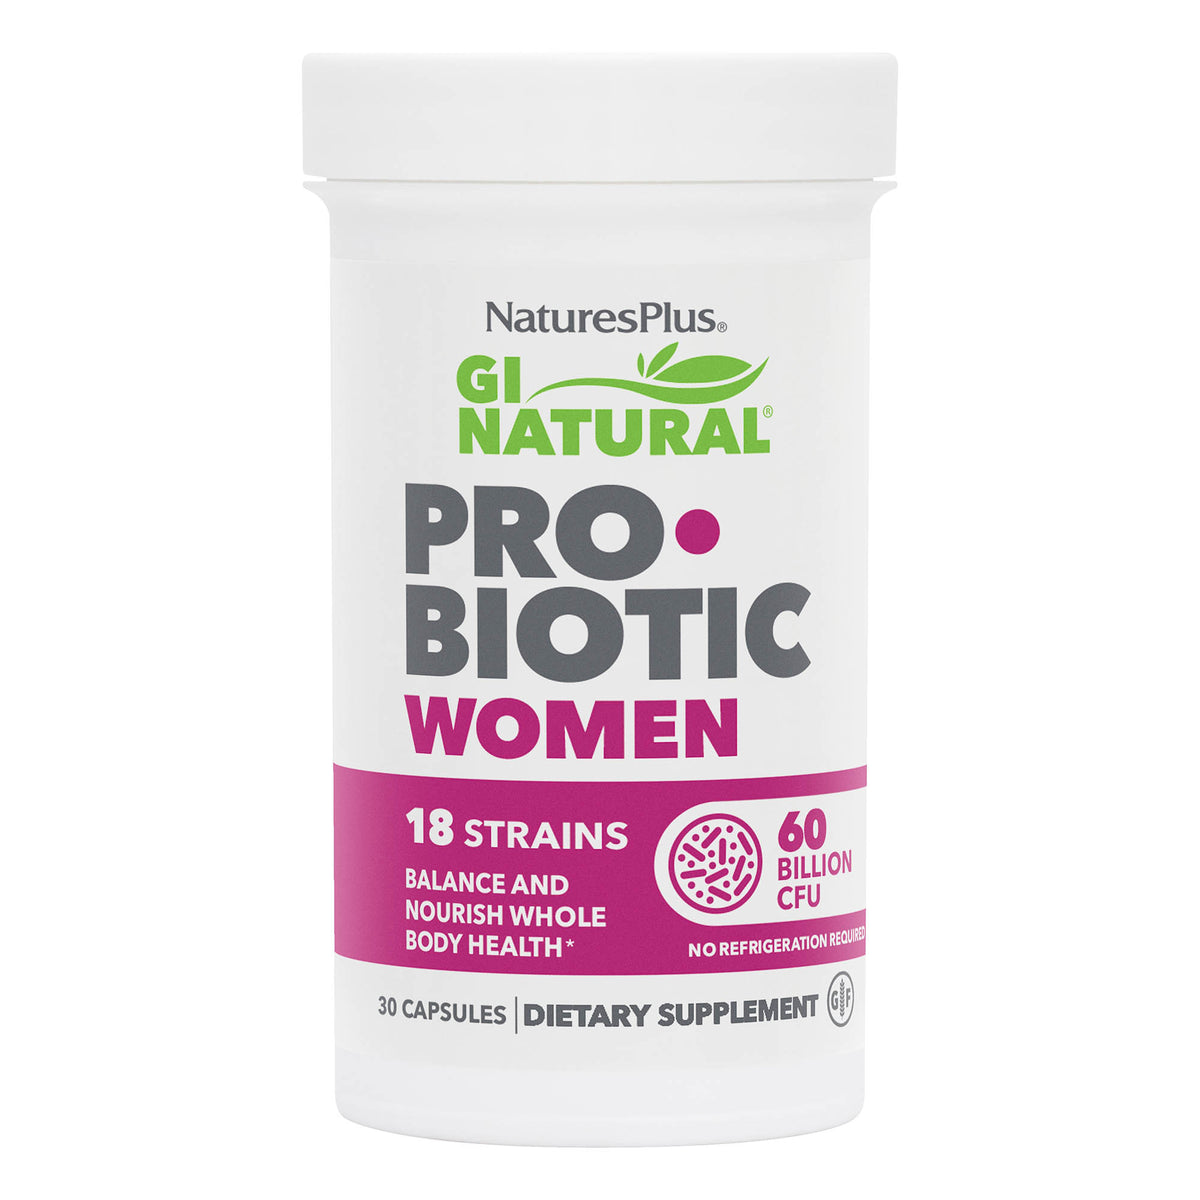 product image of GI Natural® Probiotic Women containing 30 Count